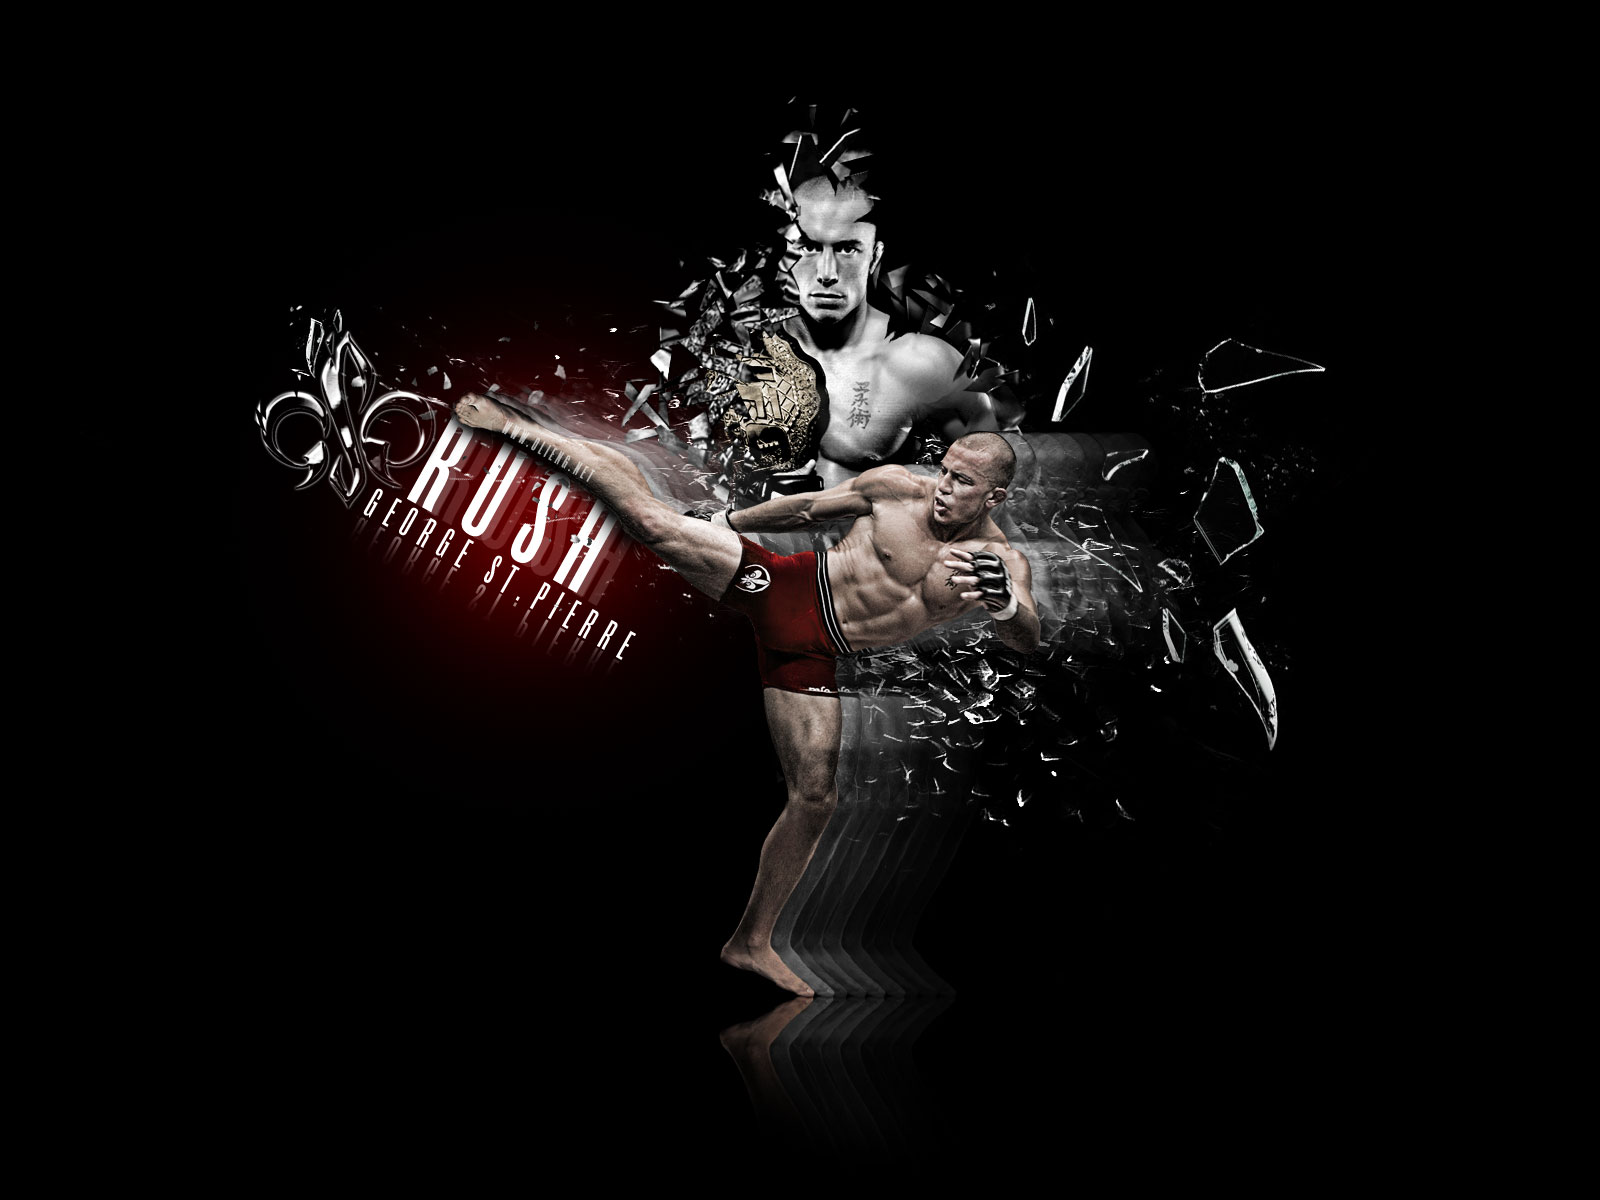 ... fighting championship mma mixed martial arts wallpaper background